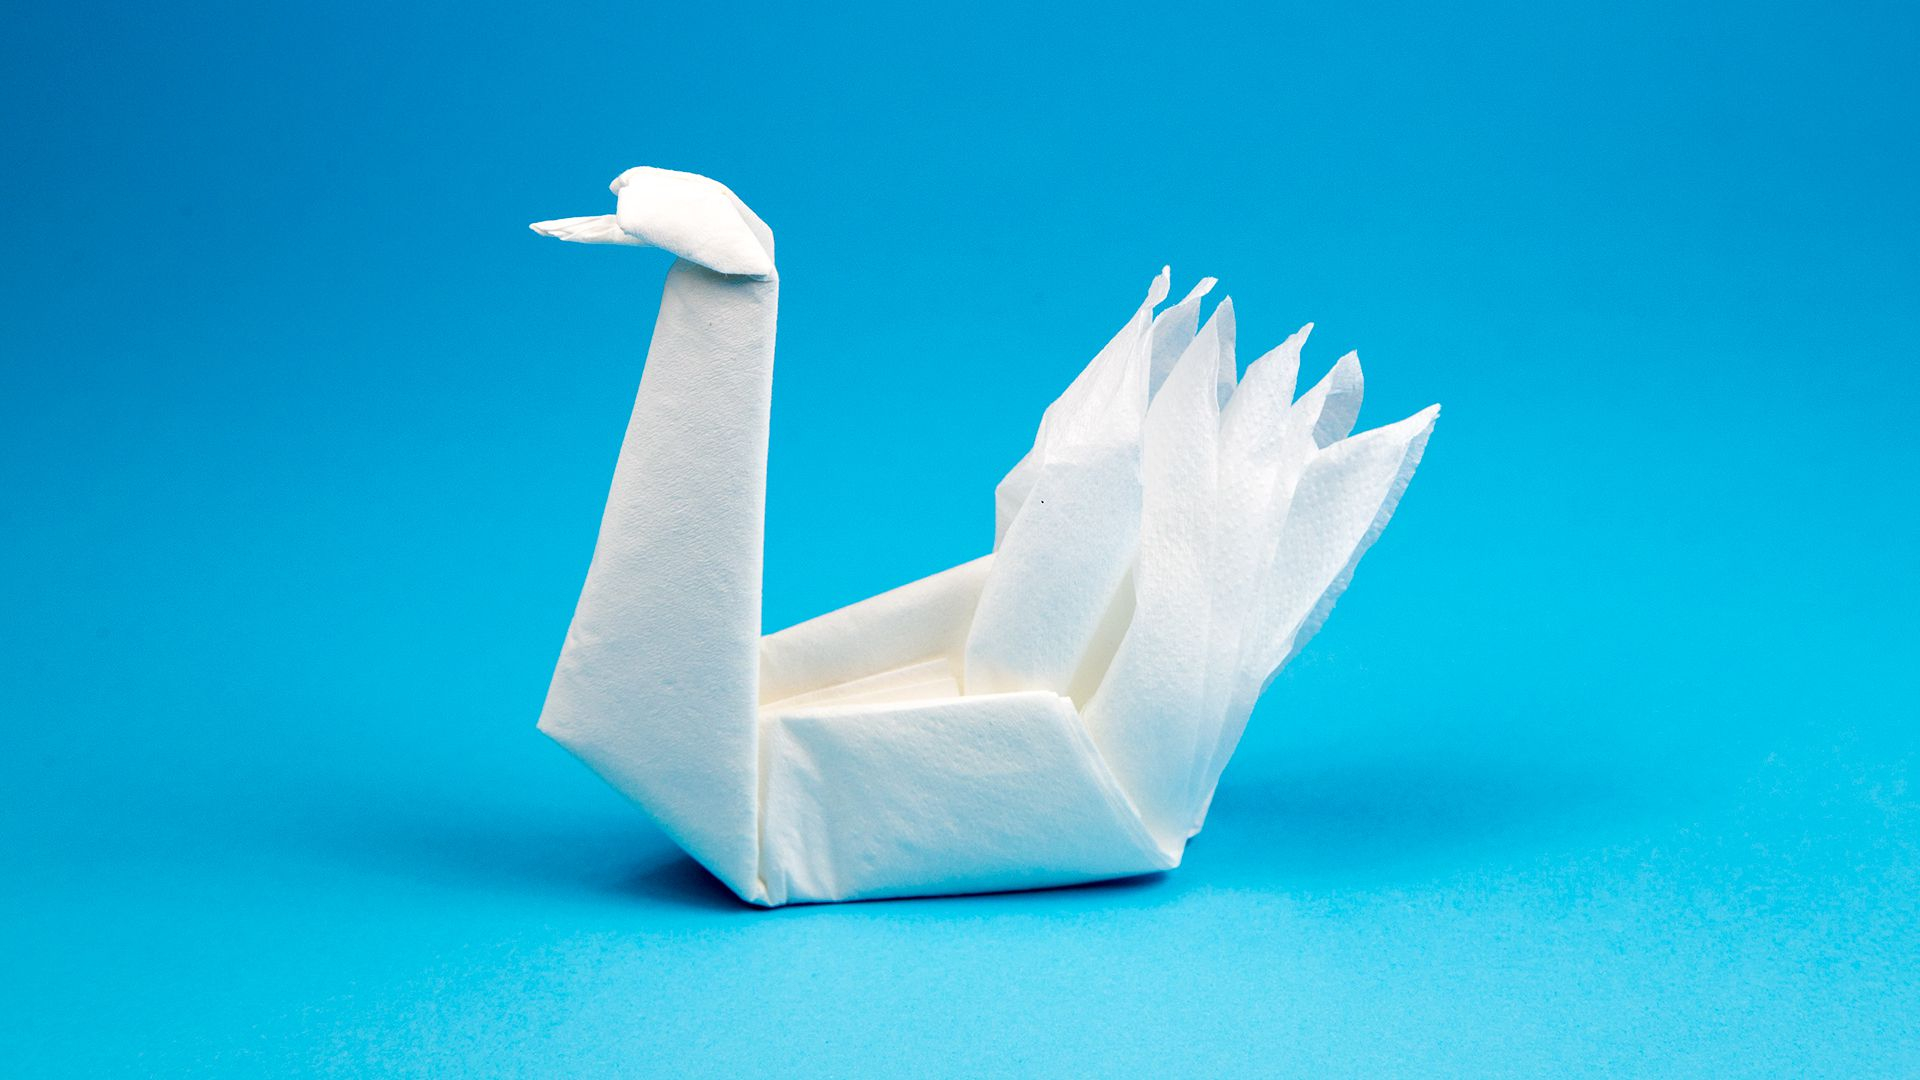 How To Make Origami Swans How To Make An Origami Napkin Swan